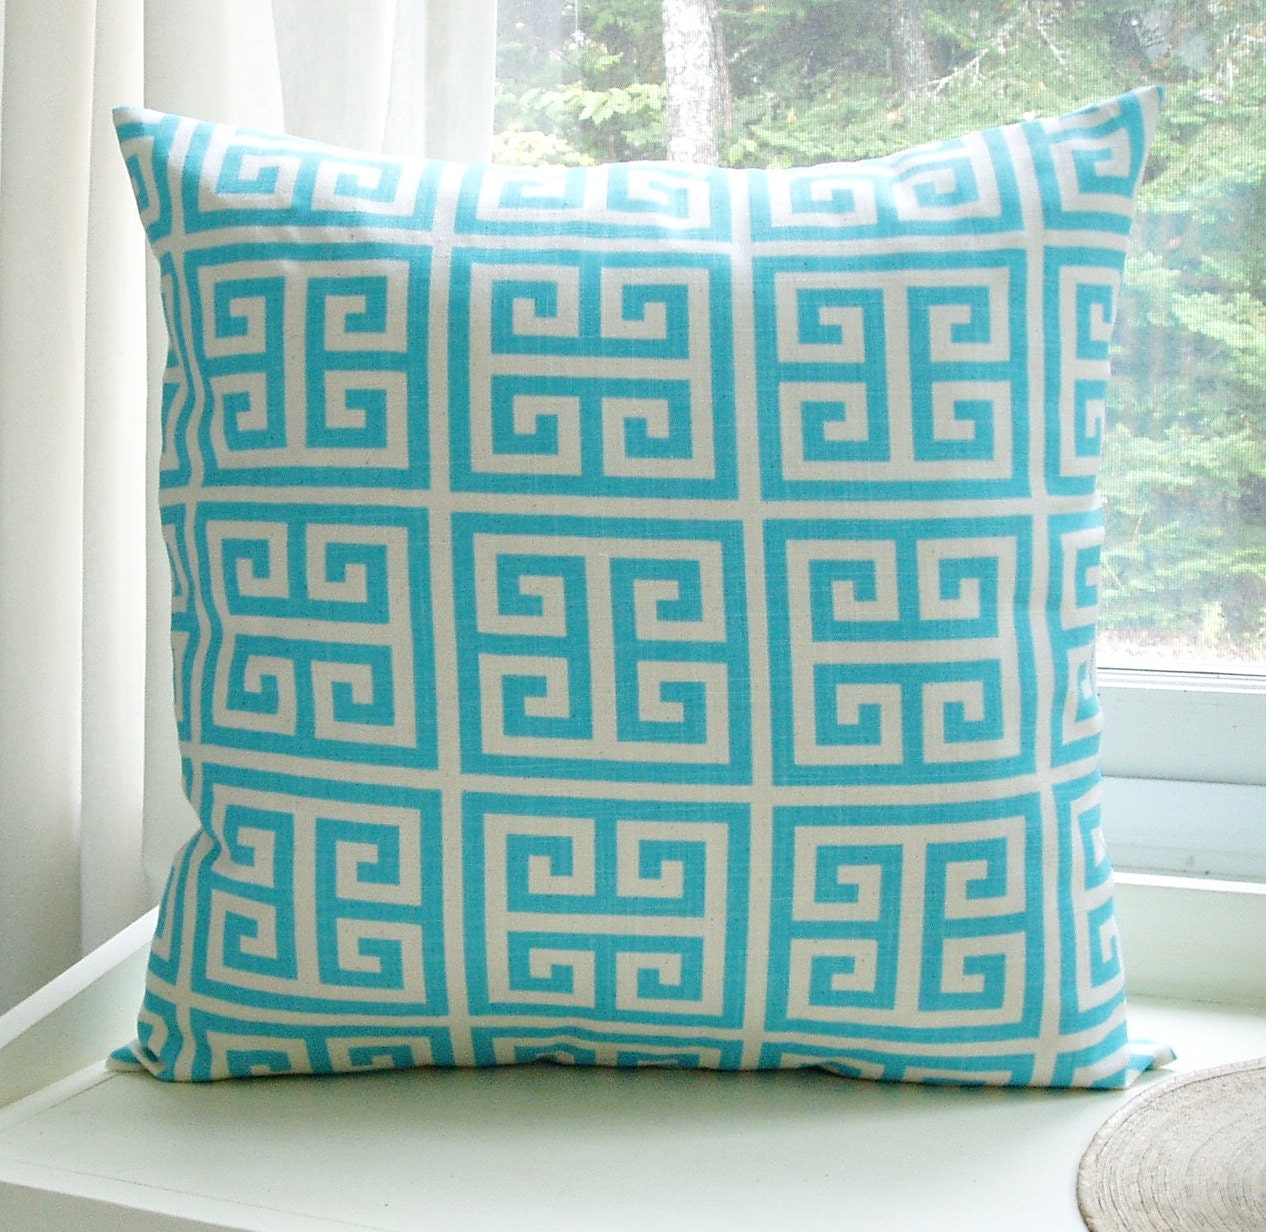 Turquoise Pillow Cover Decorative Pillow 22x22 Cushion cover Greek Key Pillow - BlossomPillowCo